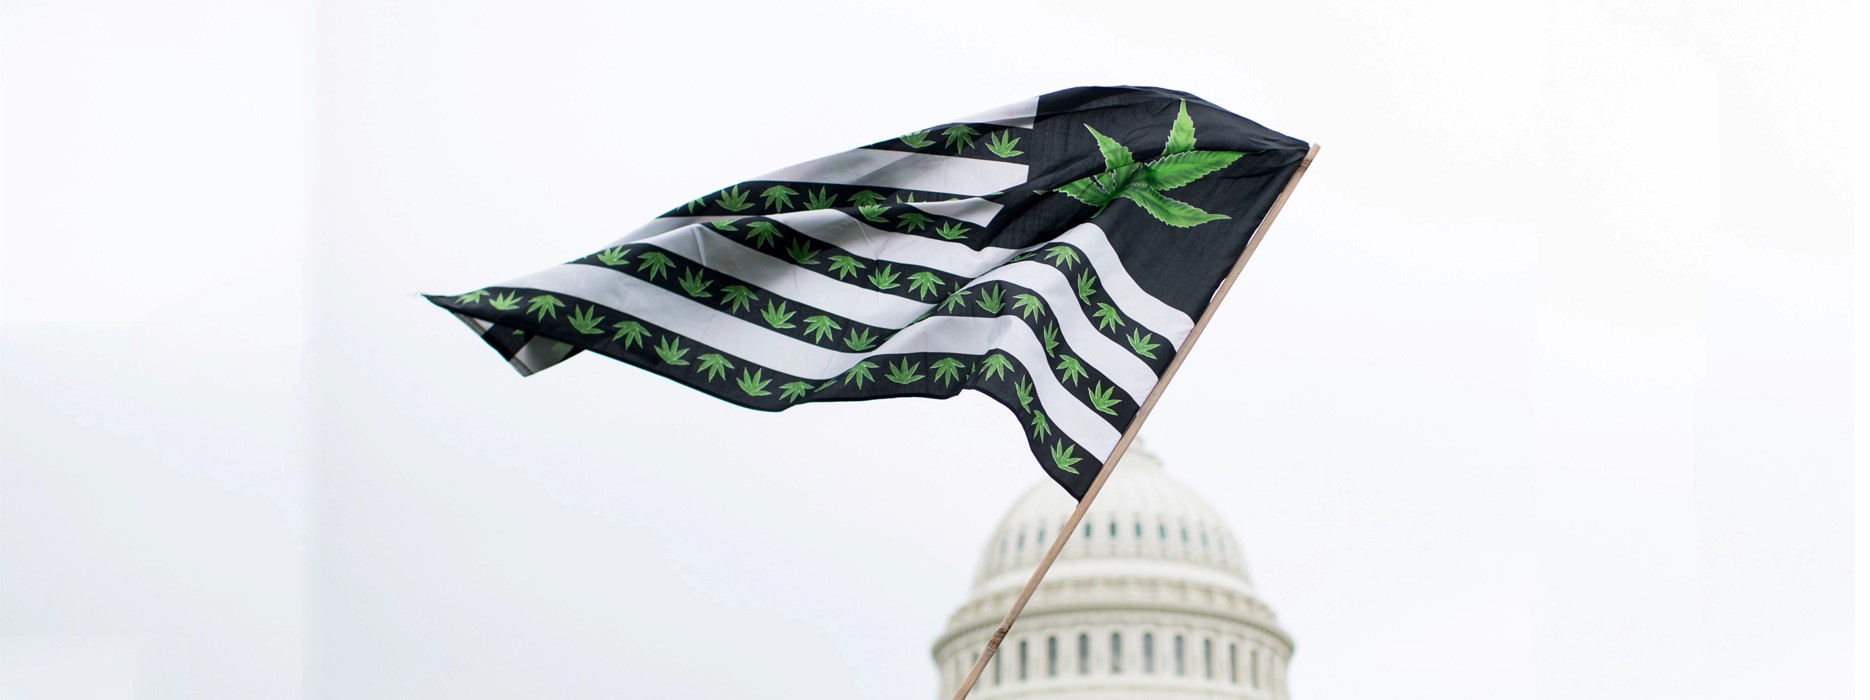 On a blurry background of a USA building dome, the flag in black and white stripes loaded with cannabis is depicted